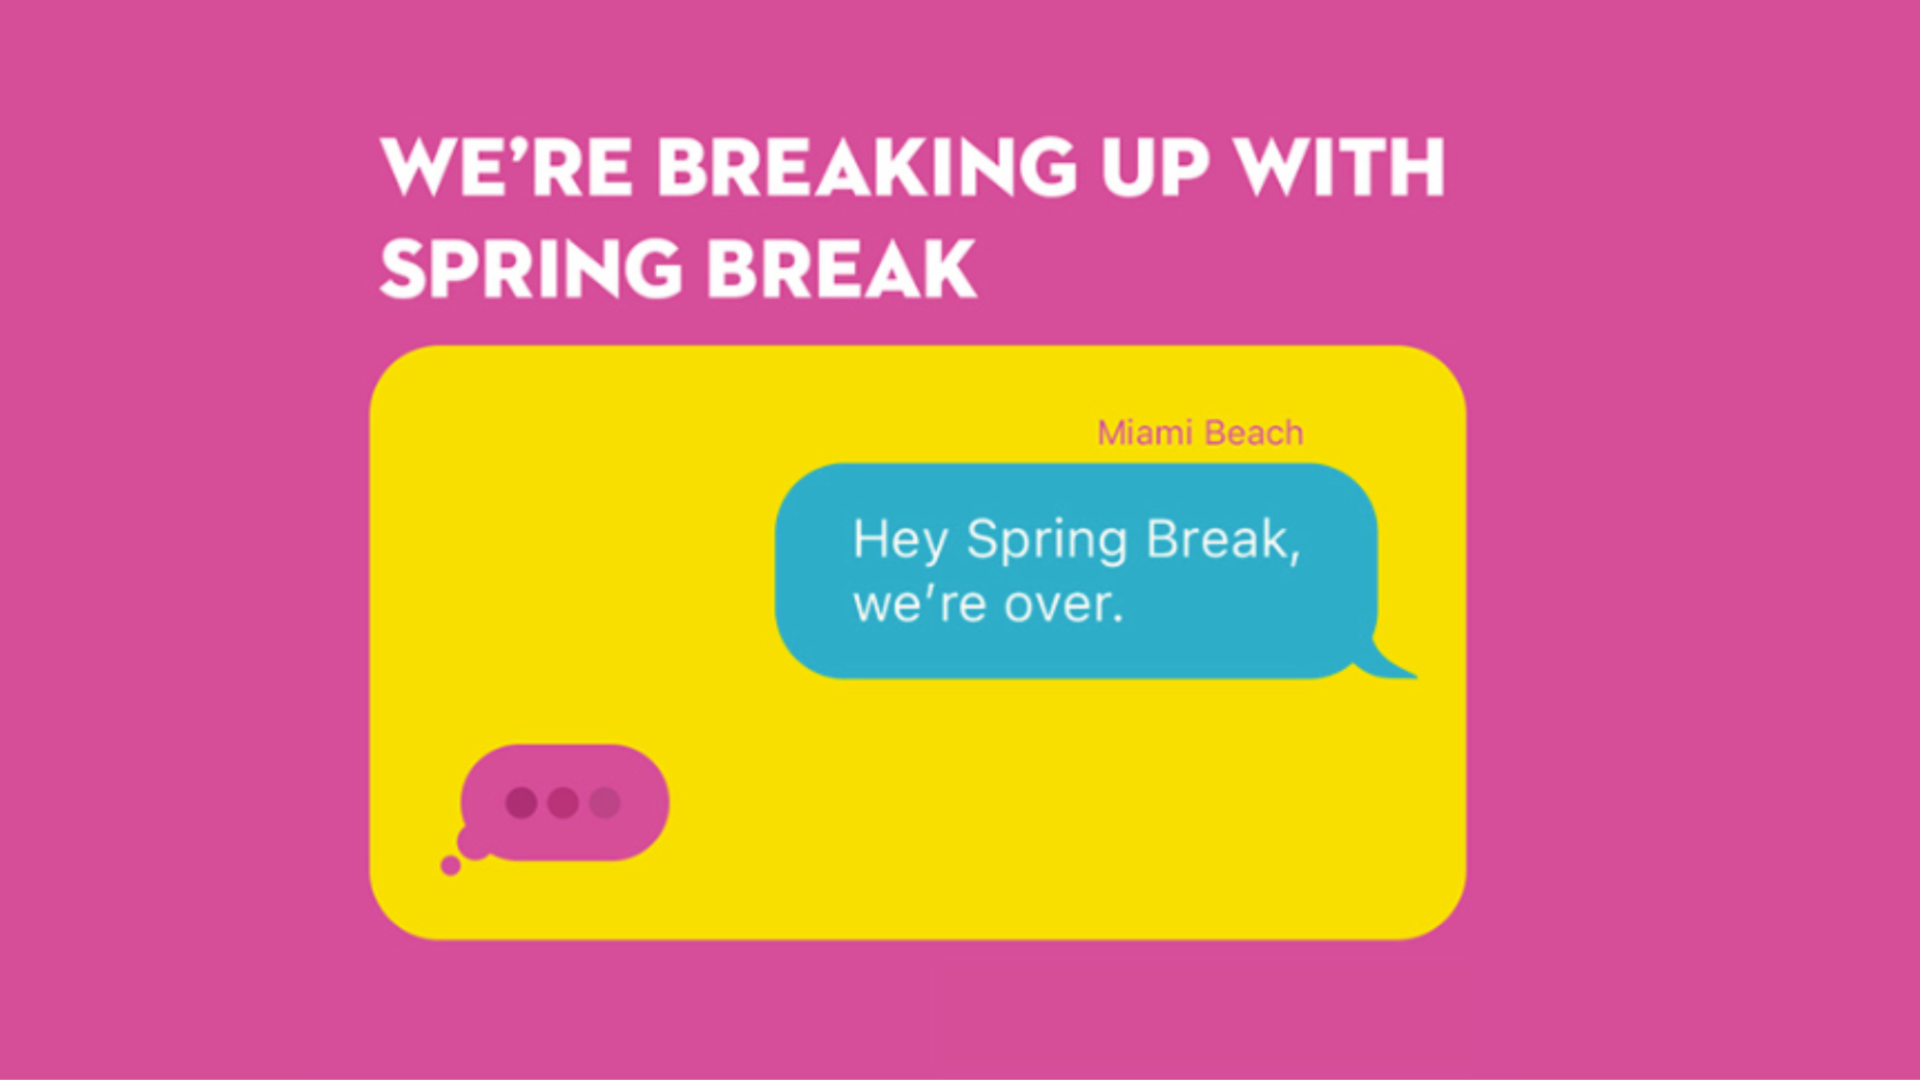 Miami Beach marketing material announcing the city is "breaking up with spring break."